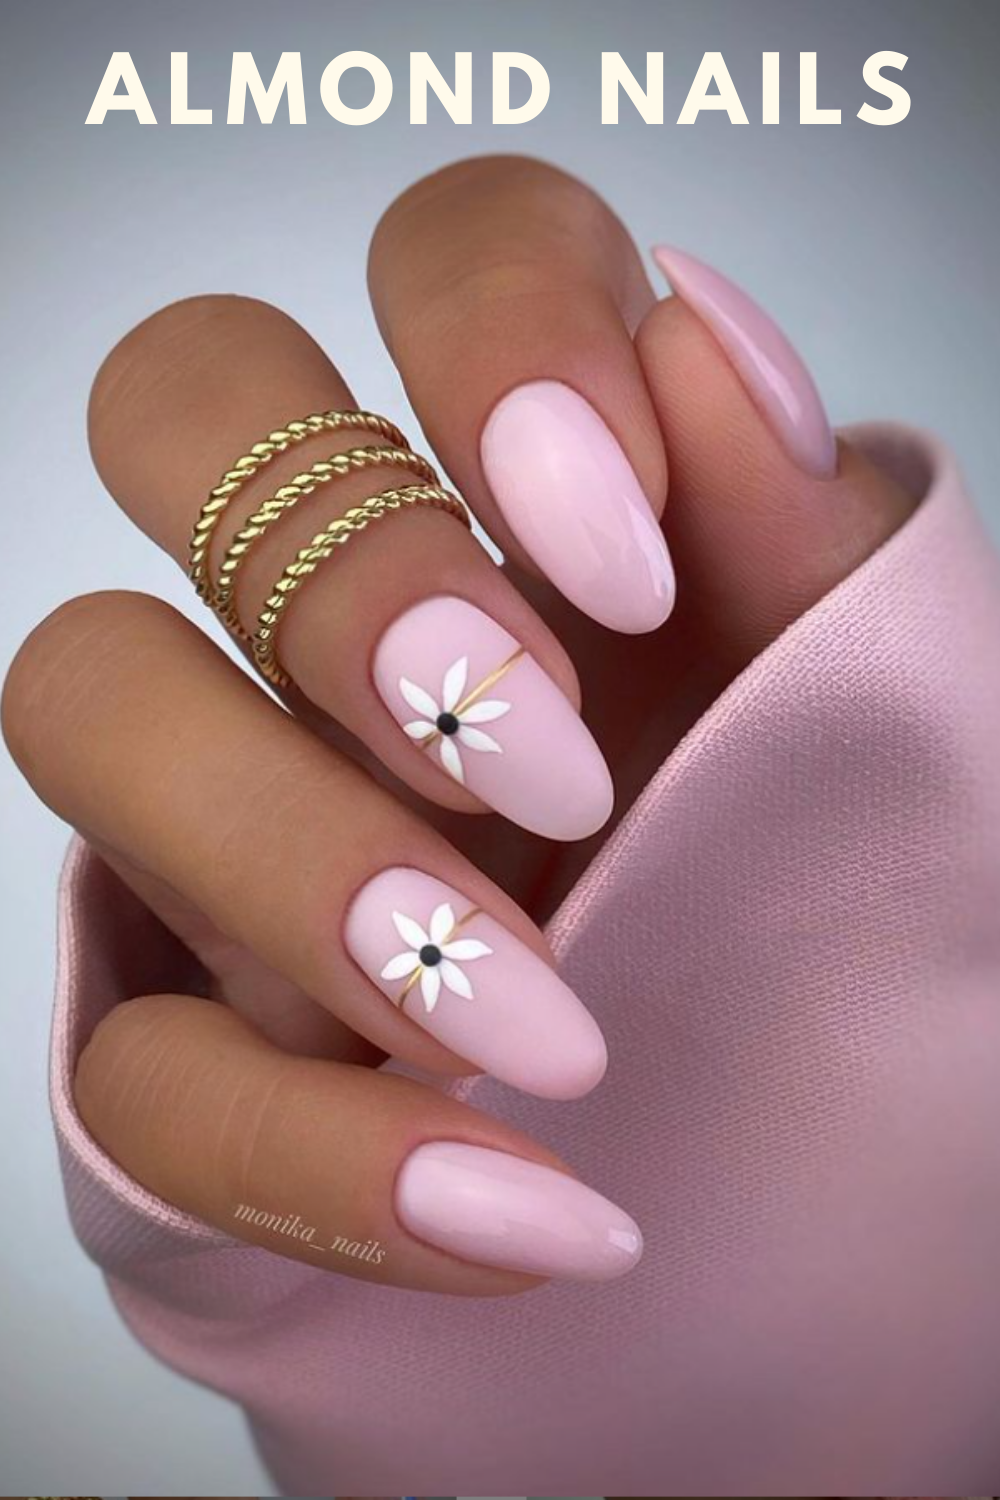 Best Almond Nail Art Design  for Everyone in 2021